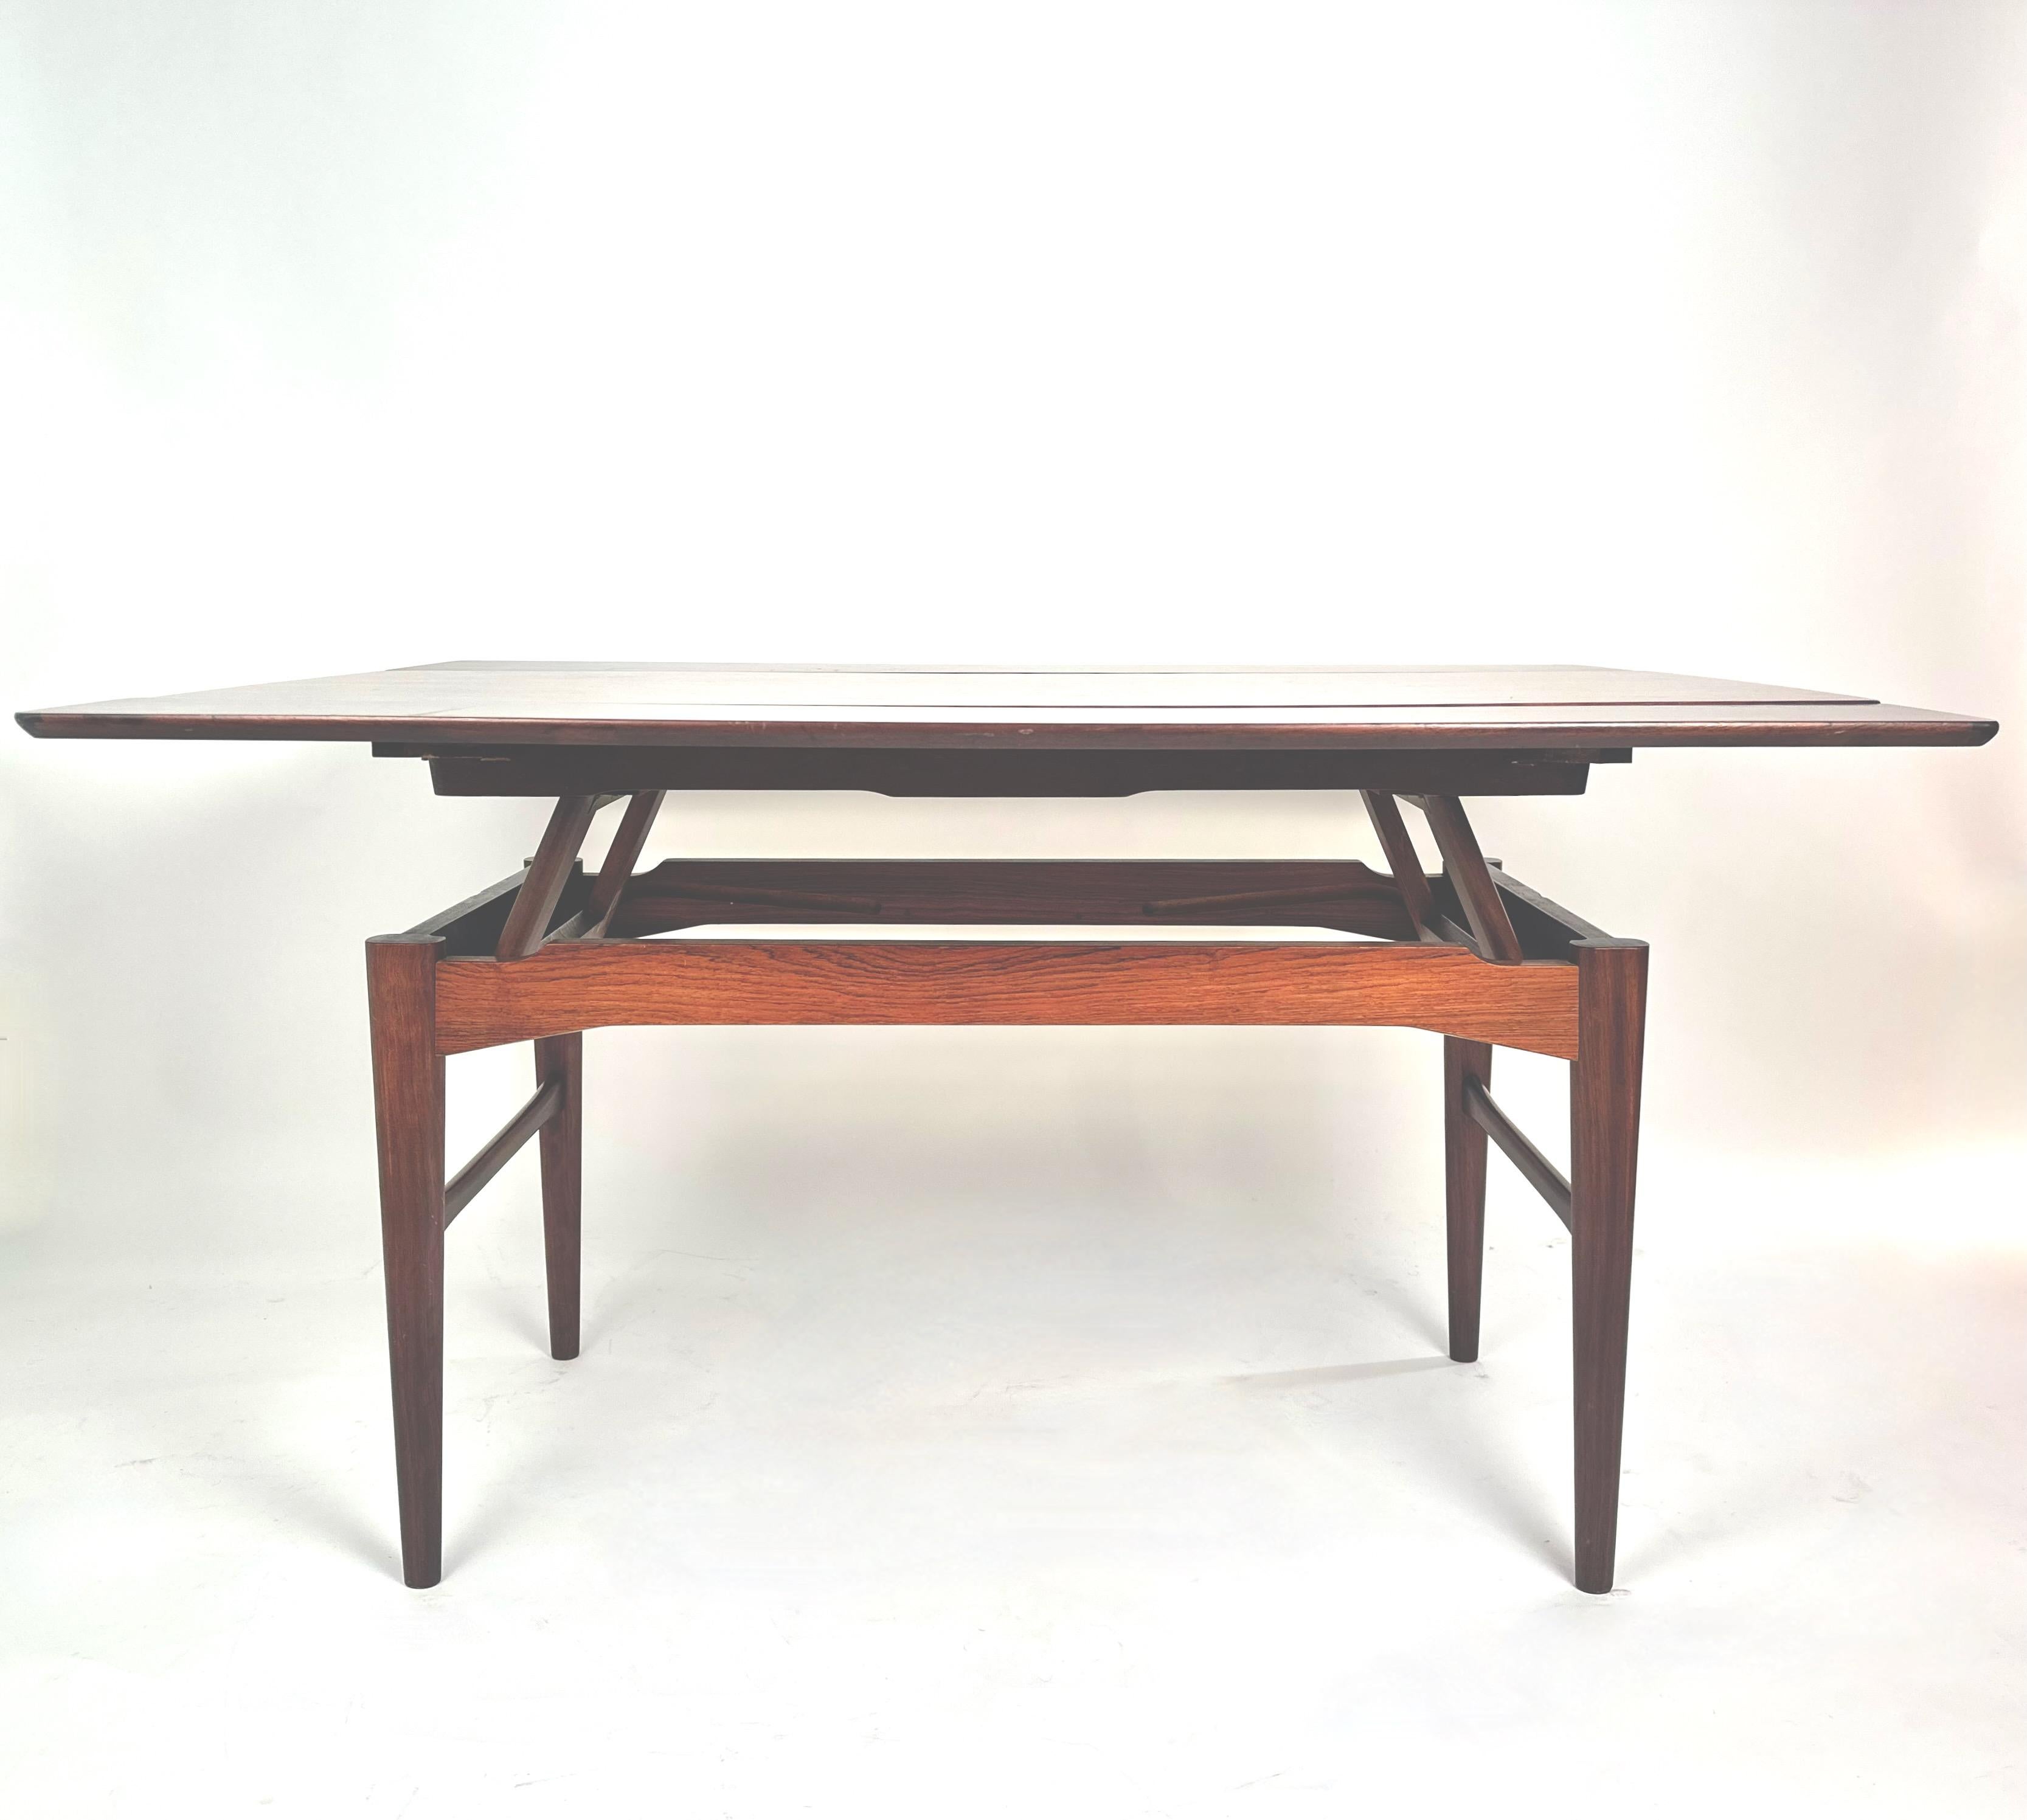 A midcentury coffee/console or dining room table, Rosewood frame. Heigth ,width different positions.Dimensions :Low position :H 55.5 cmx L 125 cm x W 70/80 cm.High position H 70 cm x W 70/80 cm x W 70/80 cm. Excellent condition.
Free packing.